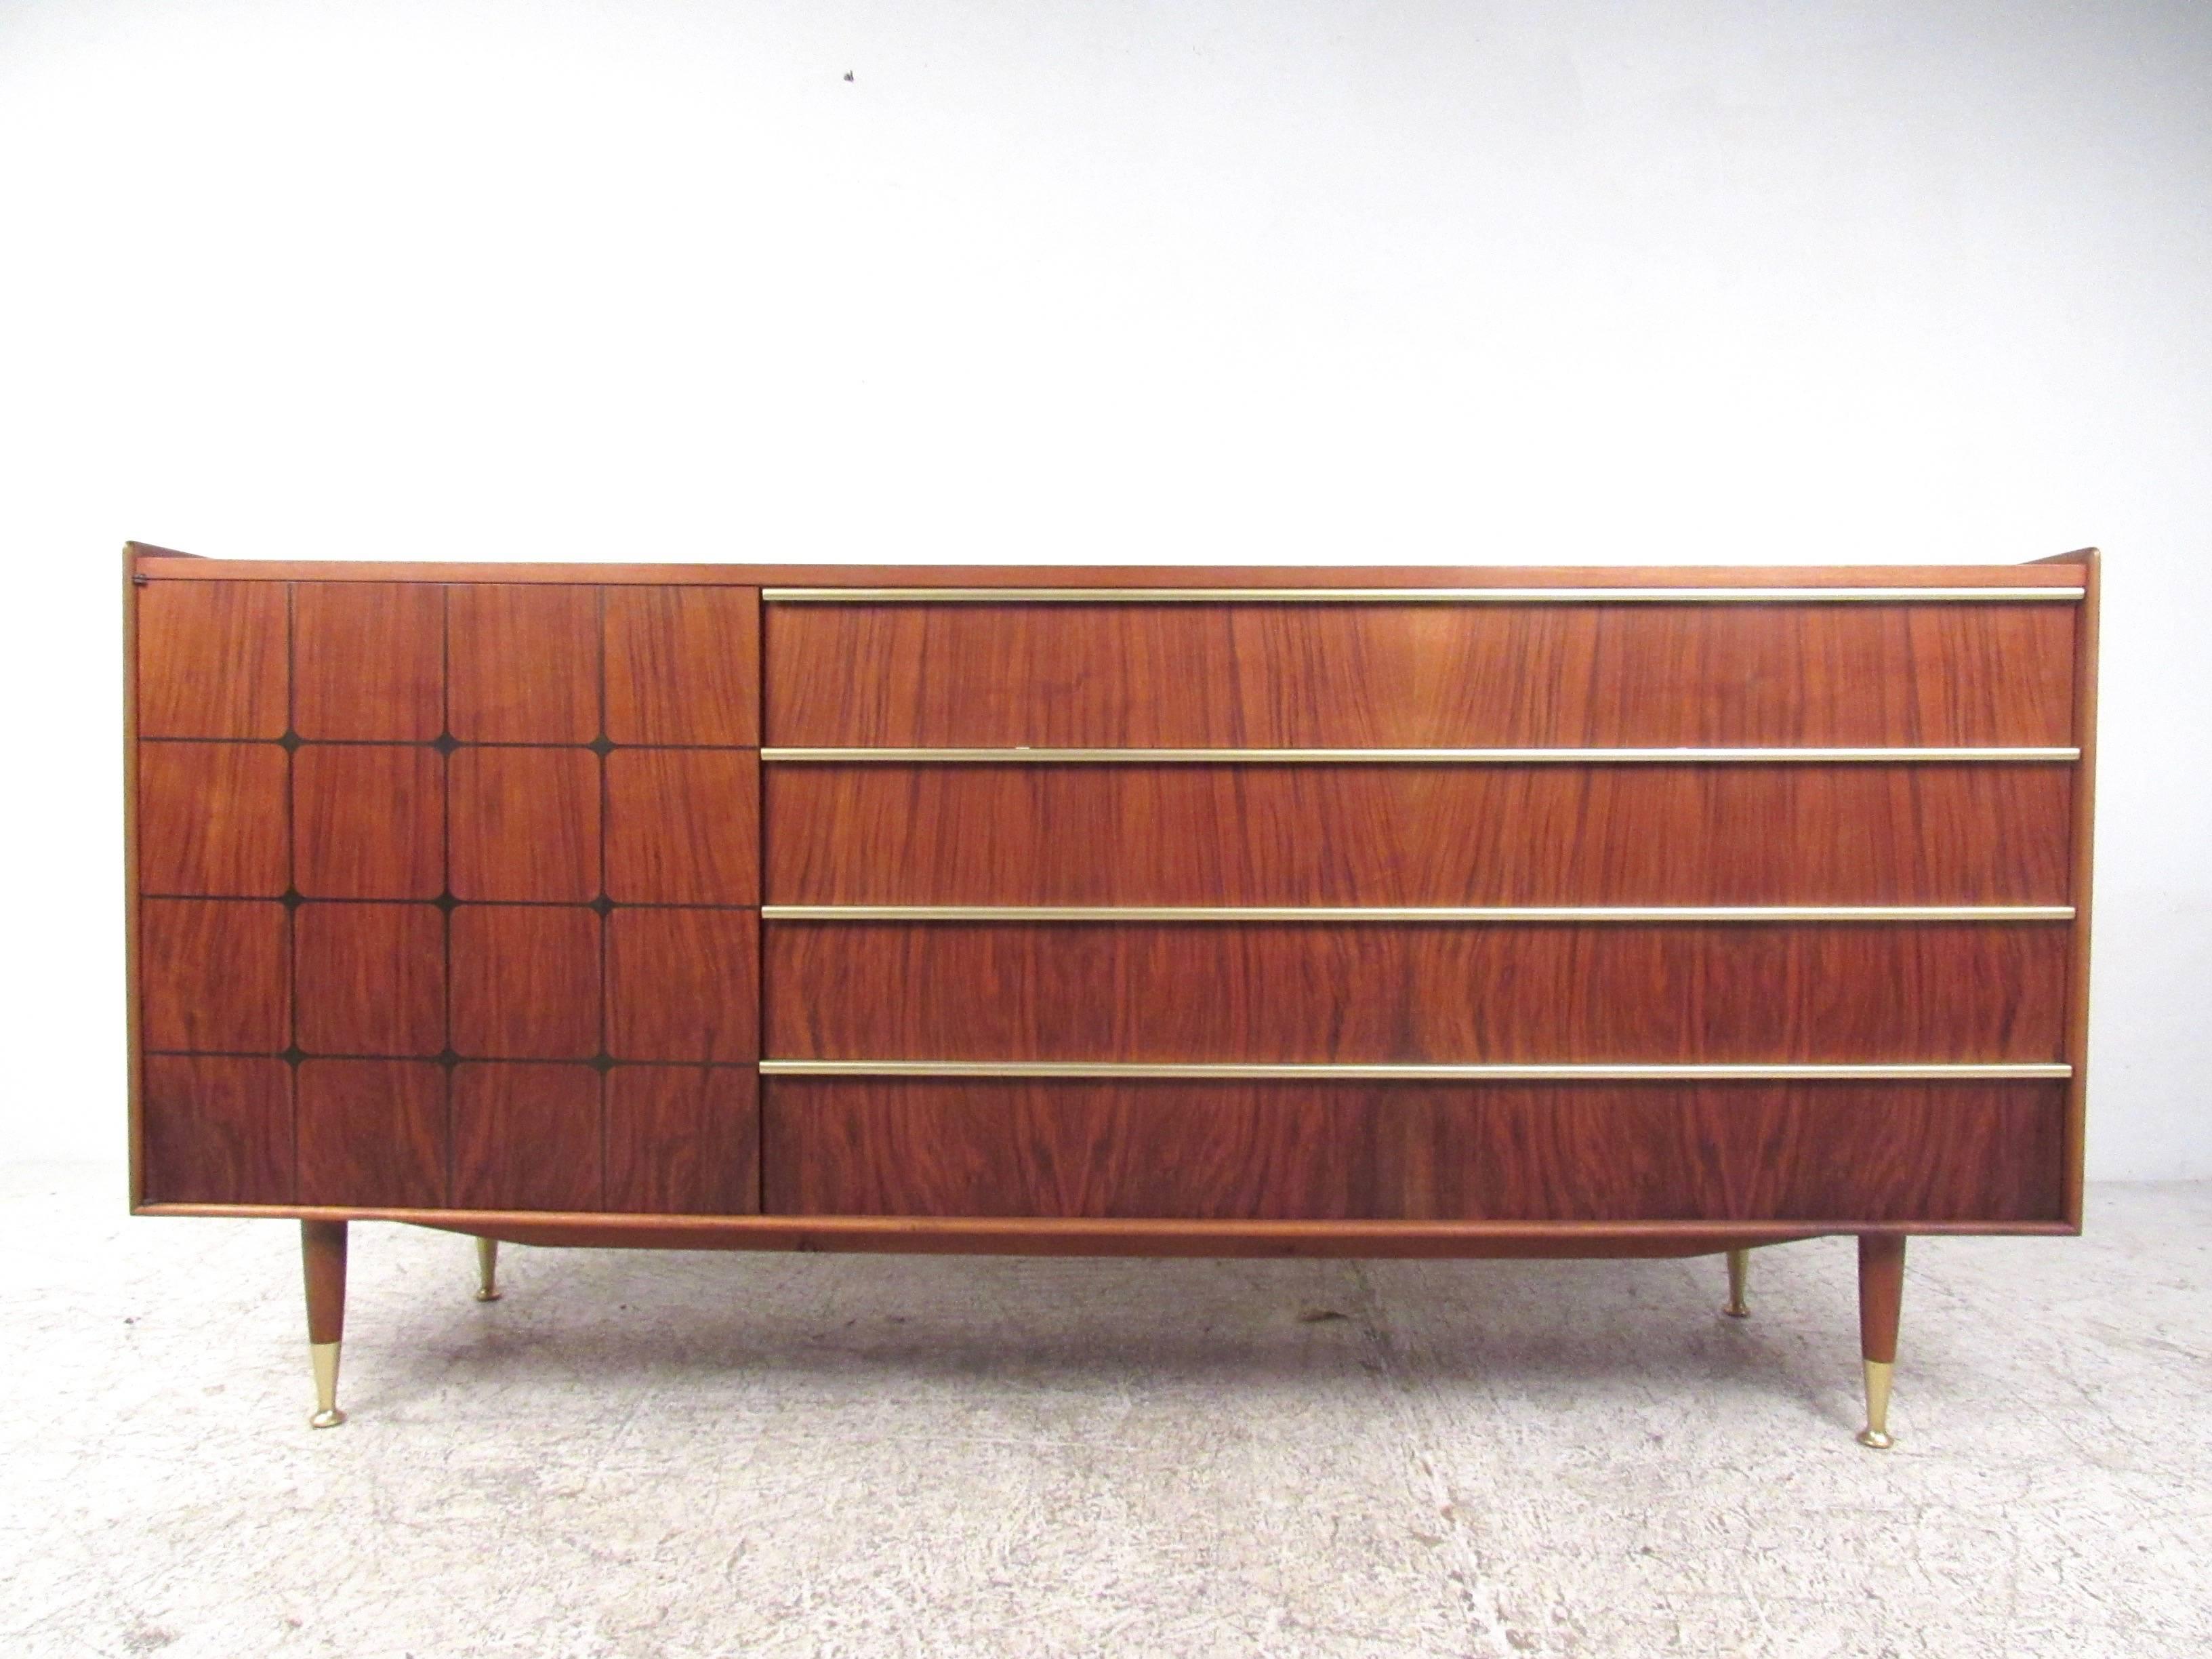 This stunning vintage sideboard features a rich vintage walnut finish with unique brass trim, raised edges, and decorative inlays. Tapered legs and a combination of cabinet and drawer storage further add to the wonderful style of Mid-Century